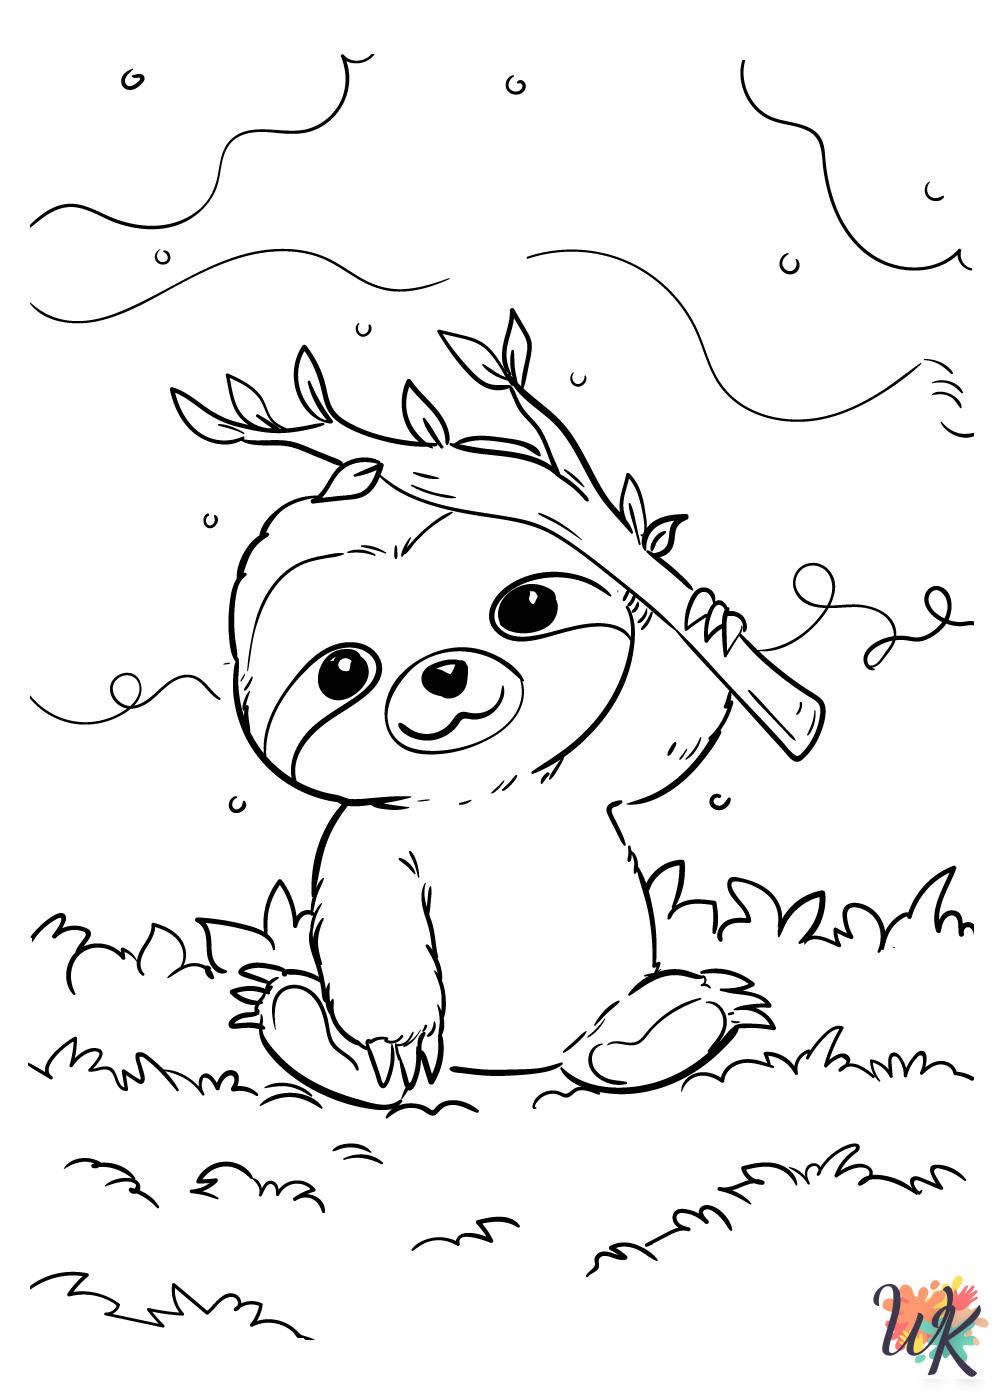 Cute Animals coloring pages for adults